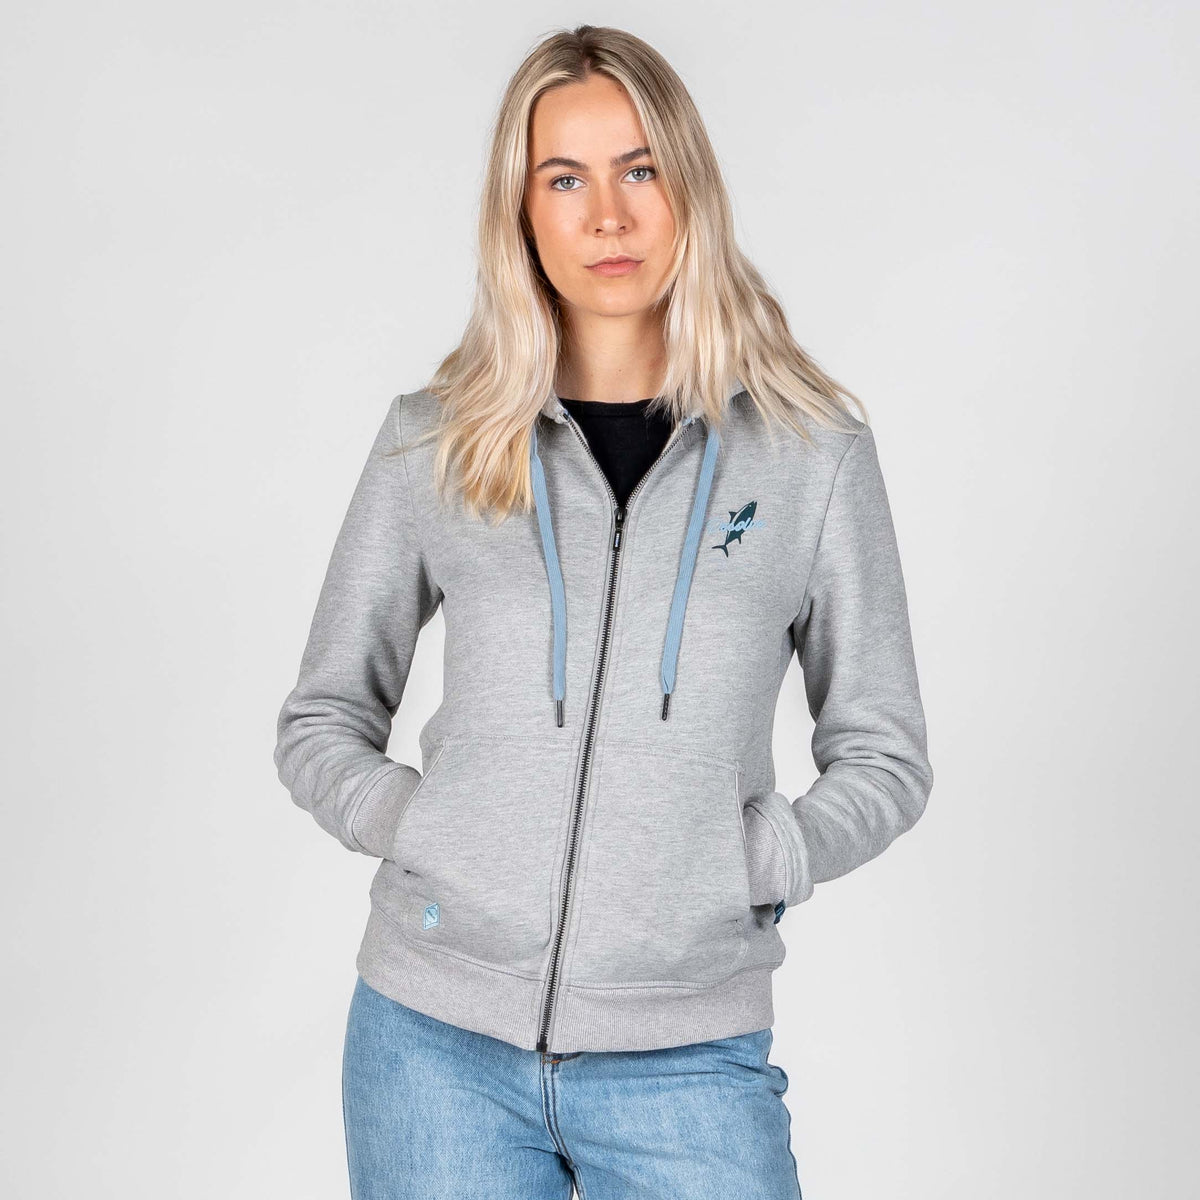 Desolve Supply Co, Forever Fishing Zip Hoodie, Two Front Pockets, Full-Zip Fishing Hoodie, Womens - Desolve Supply Co.